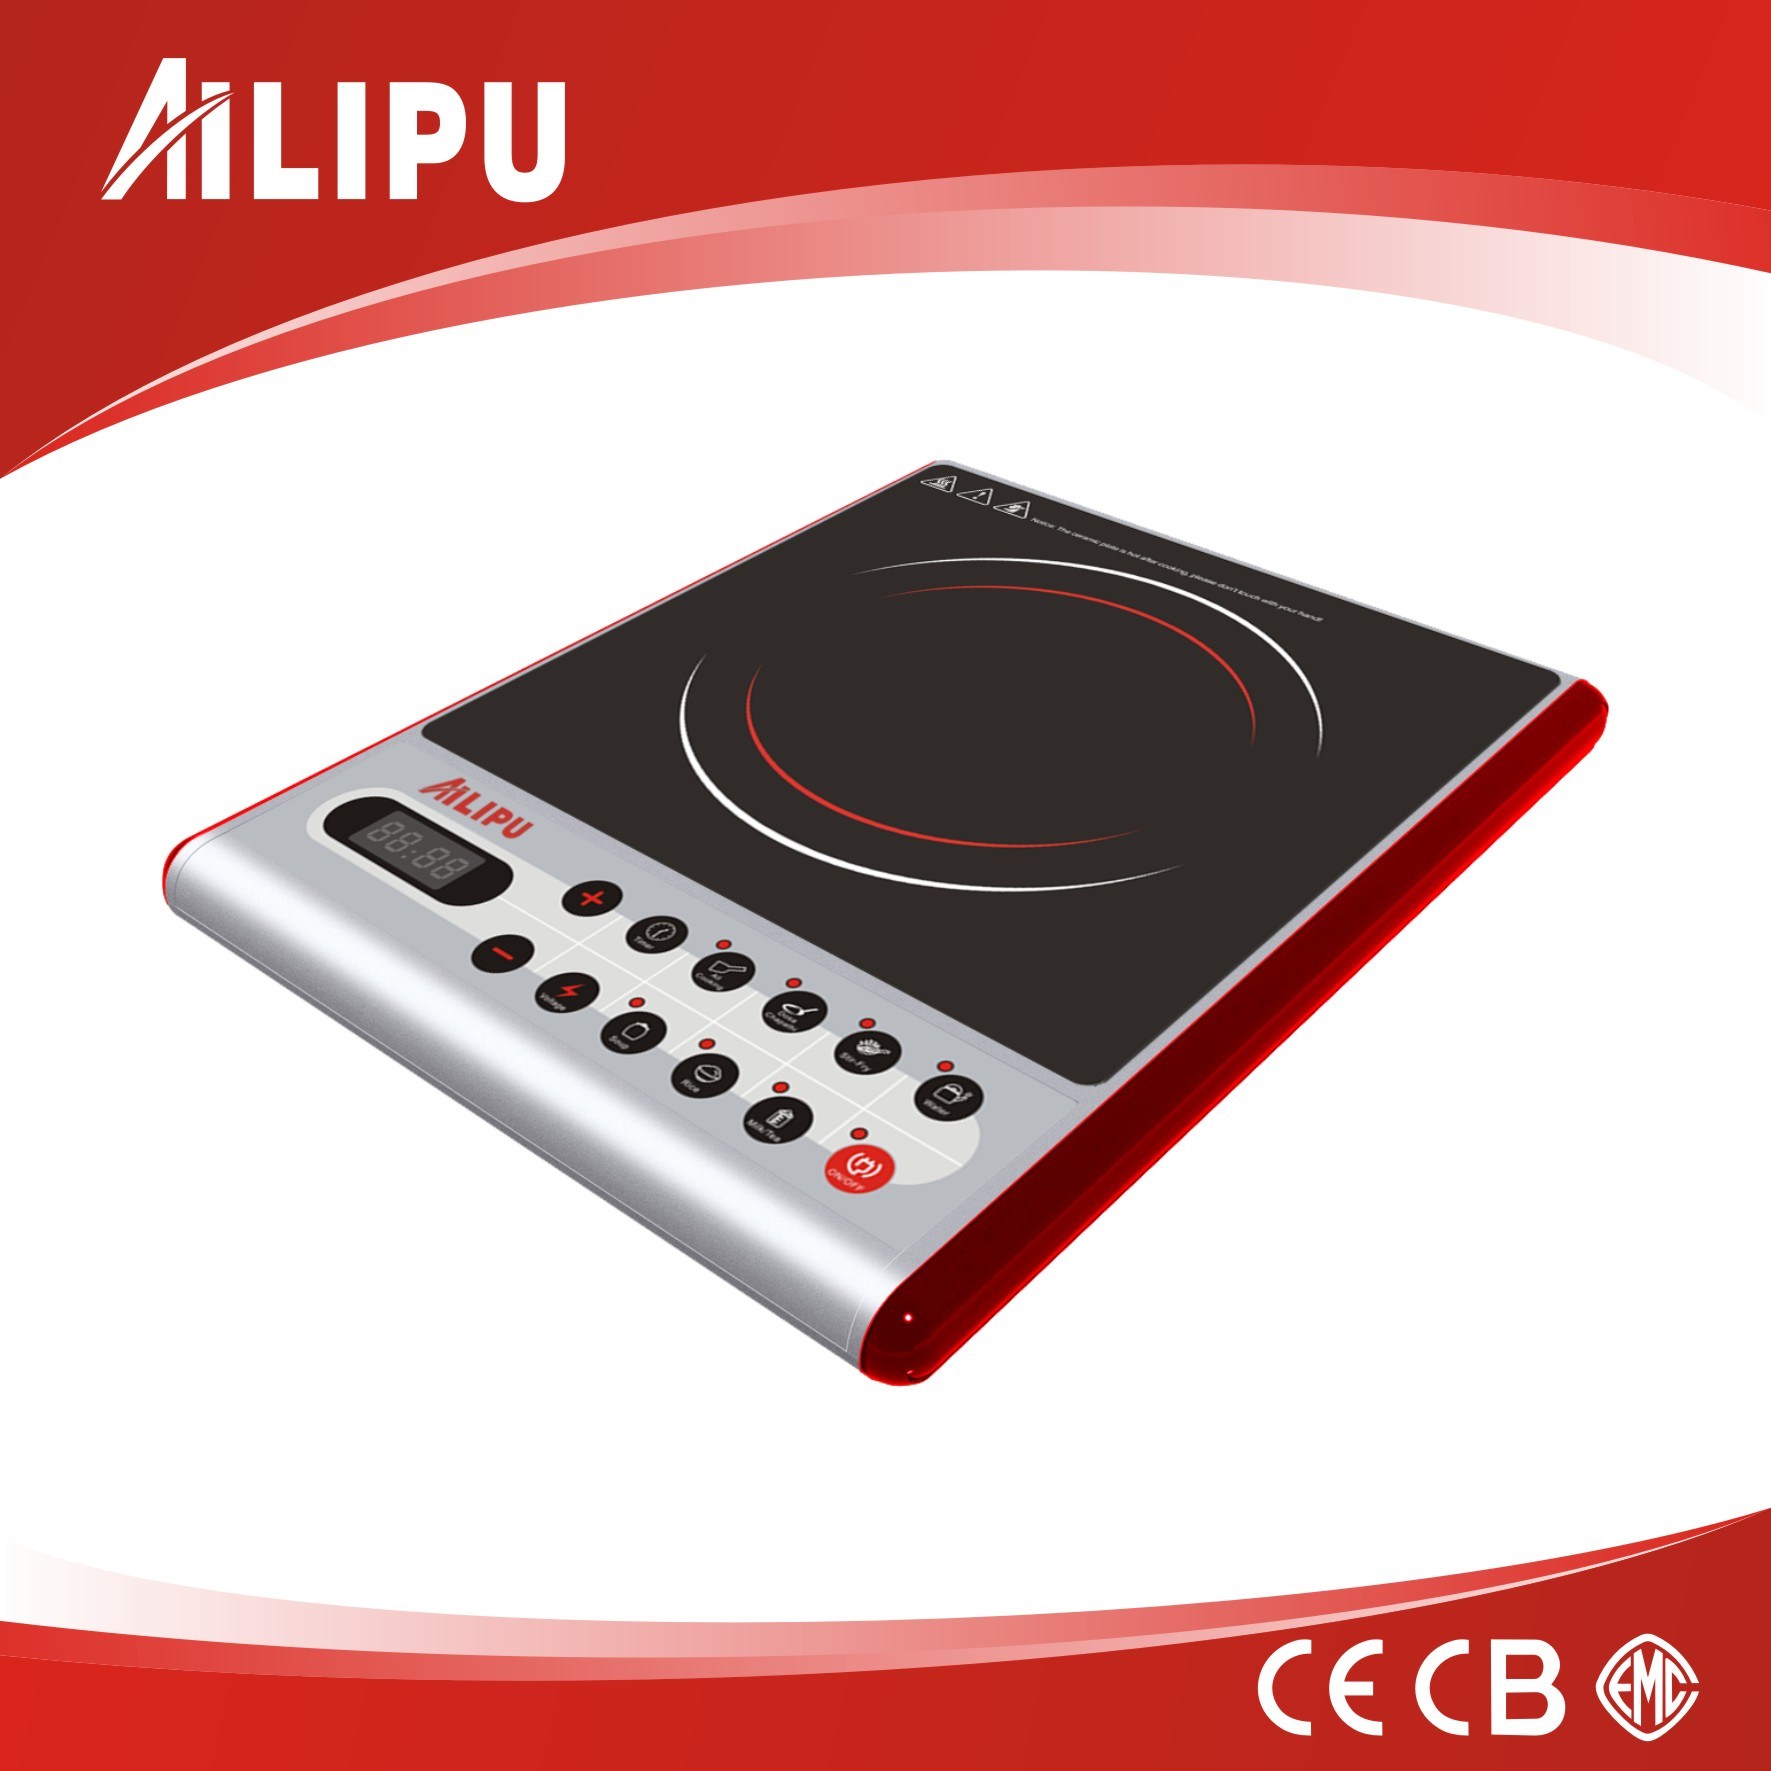 2015 Multi-Functional Single Burner Induction Cooker, Induction Cooktop with Push Button Control